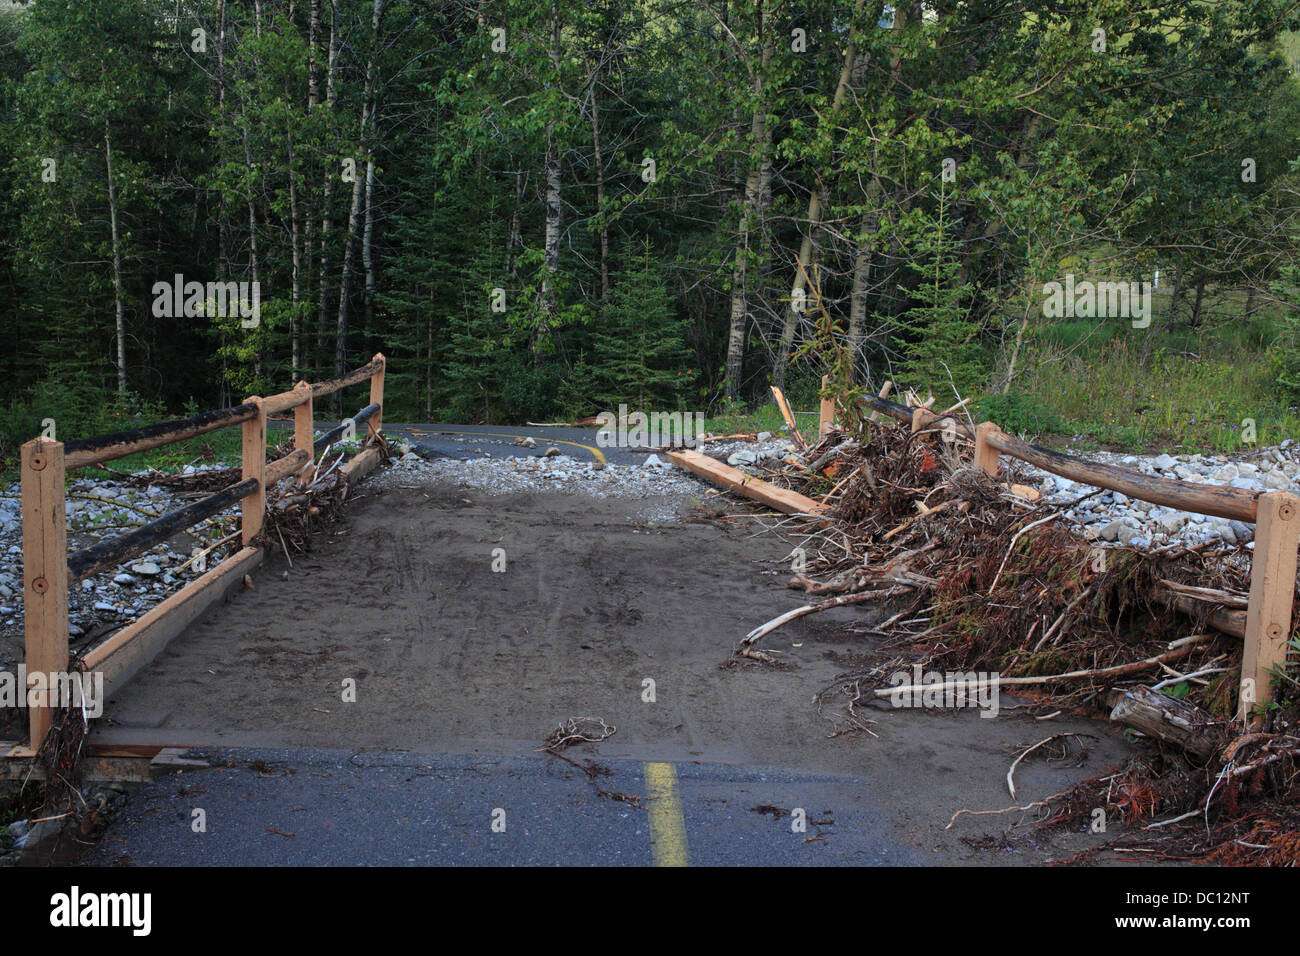 Flooded bridge with silt and drift wood in Kananaskis Country. Stock Photo